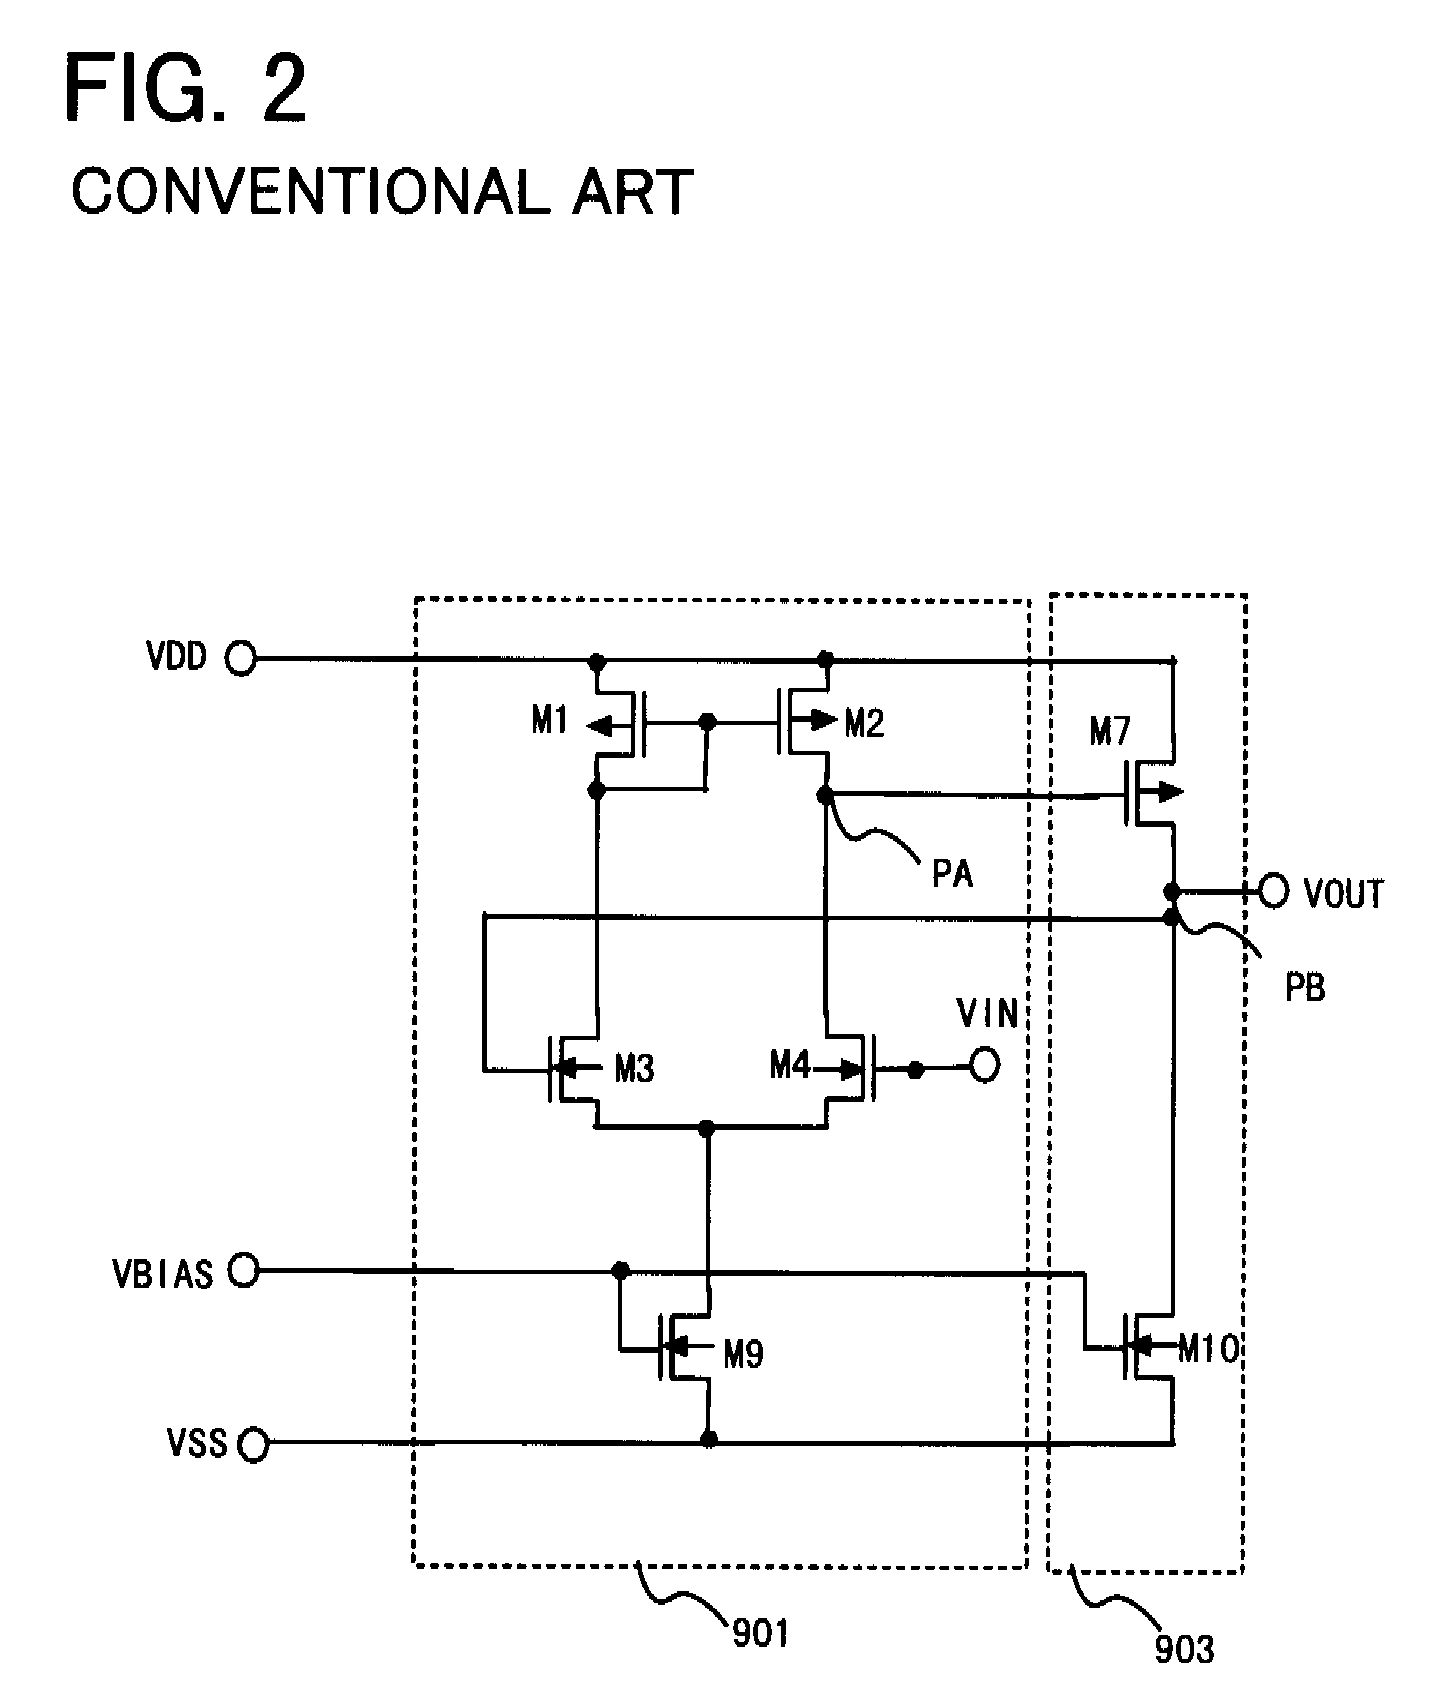 Differential amplifier, digital-to-analog converter and display device